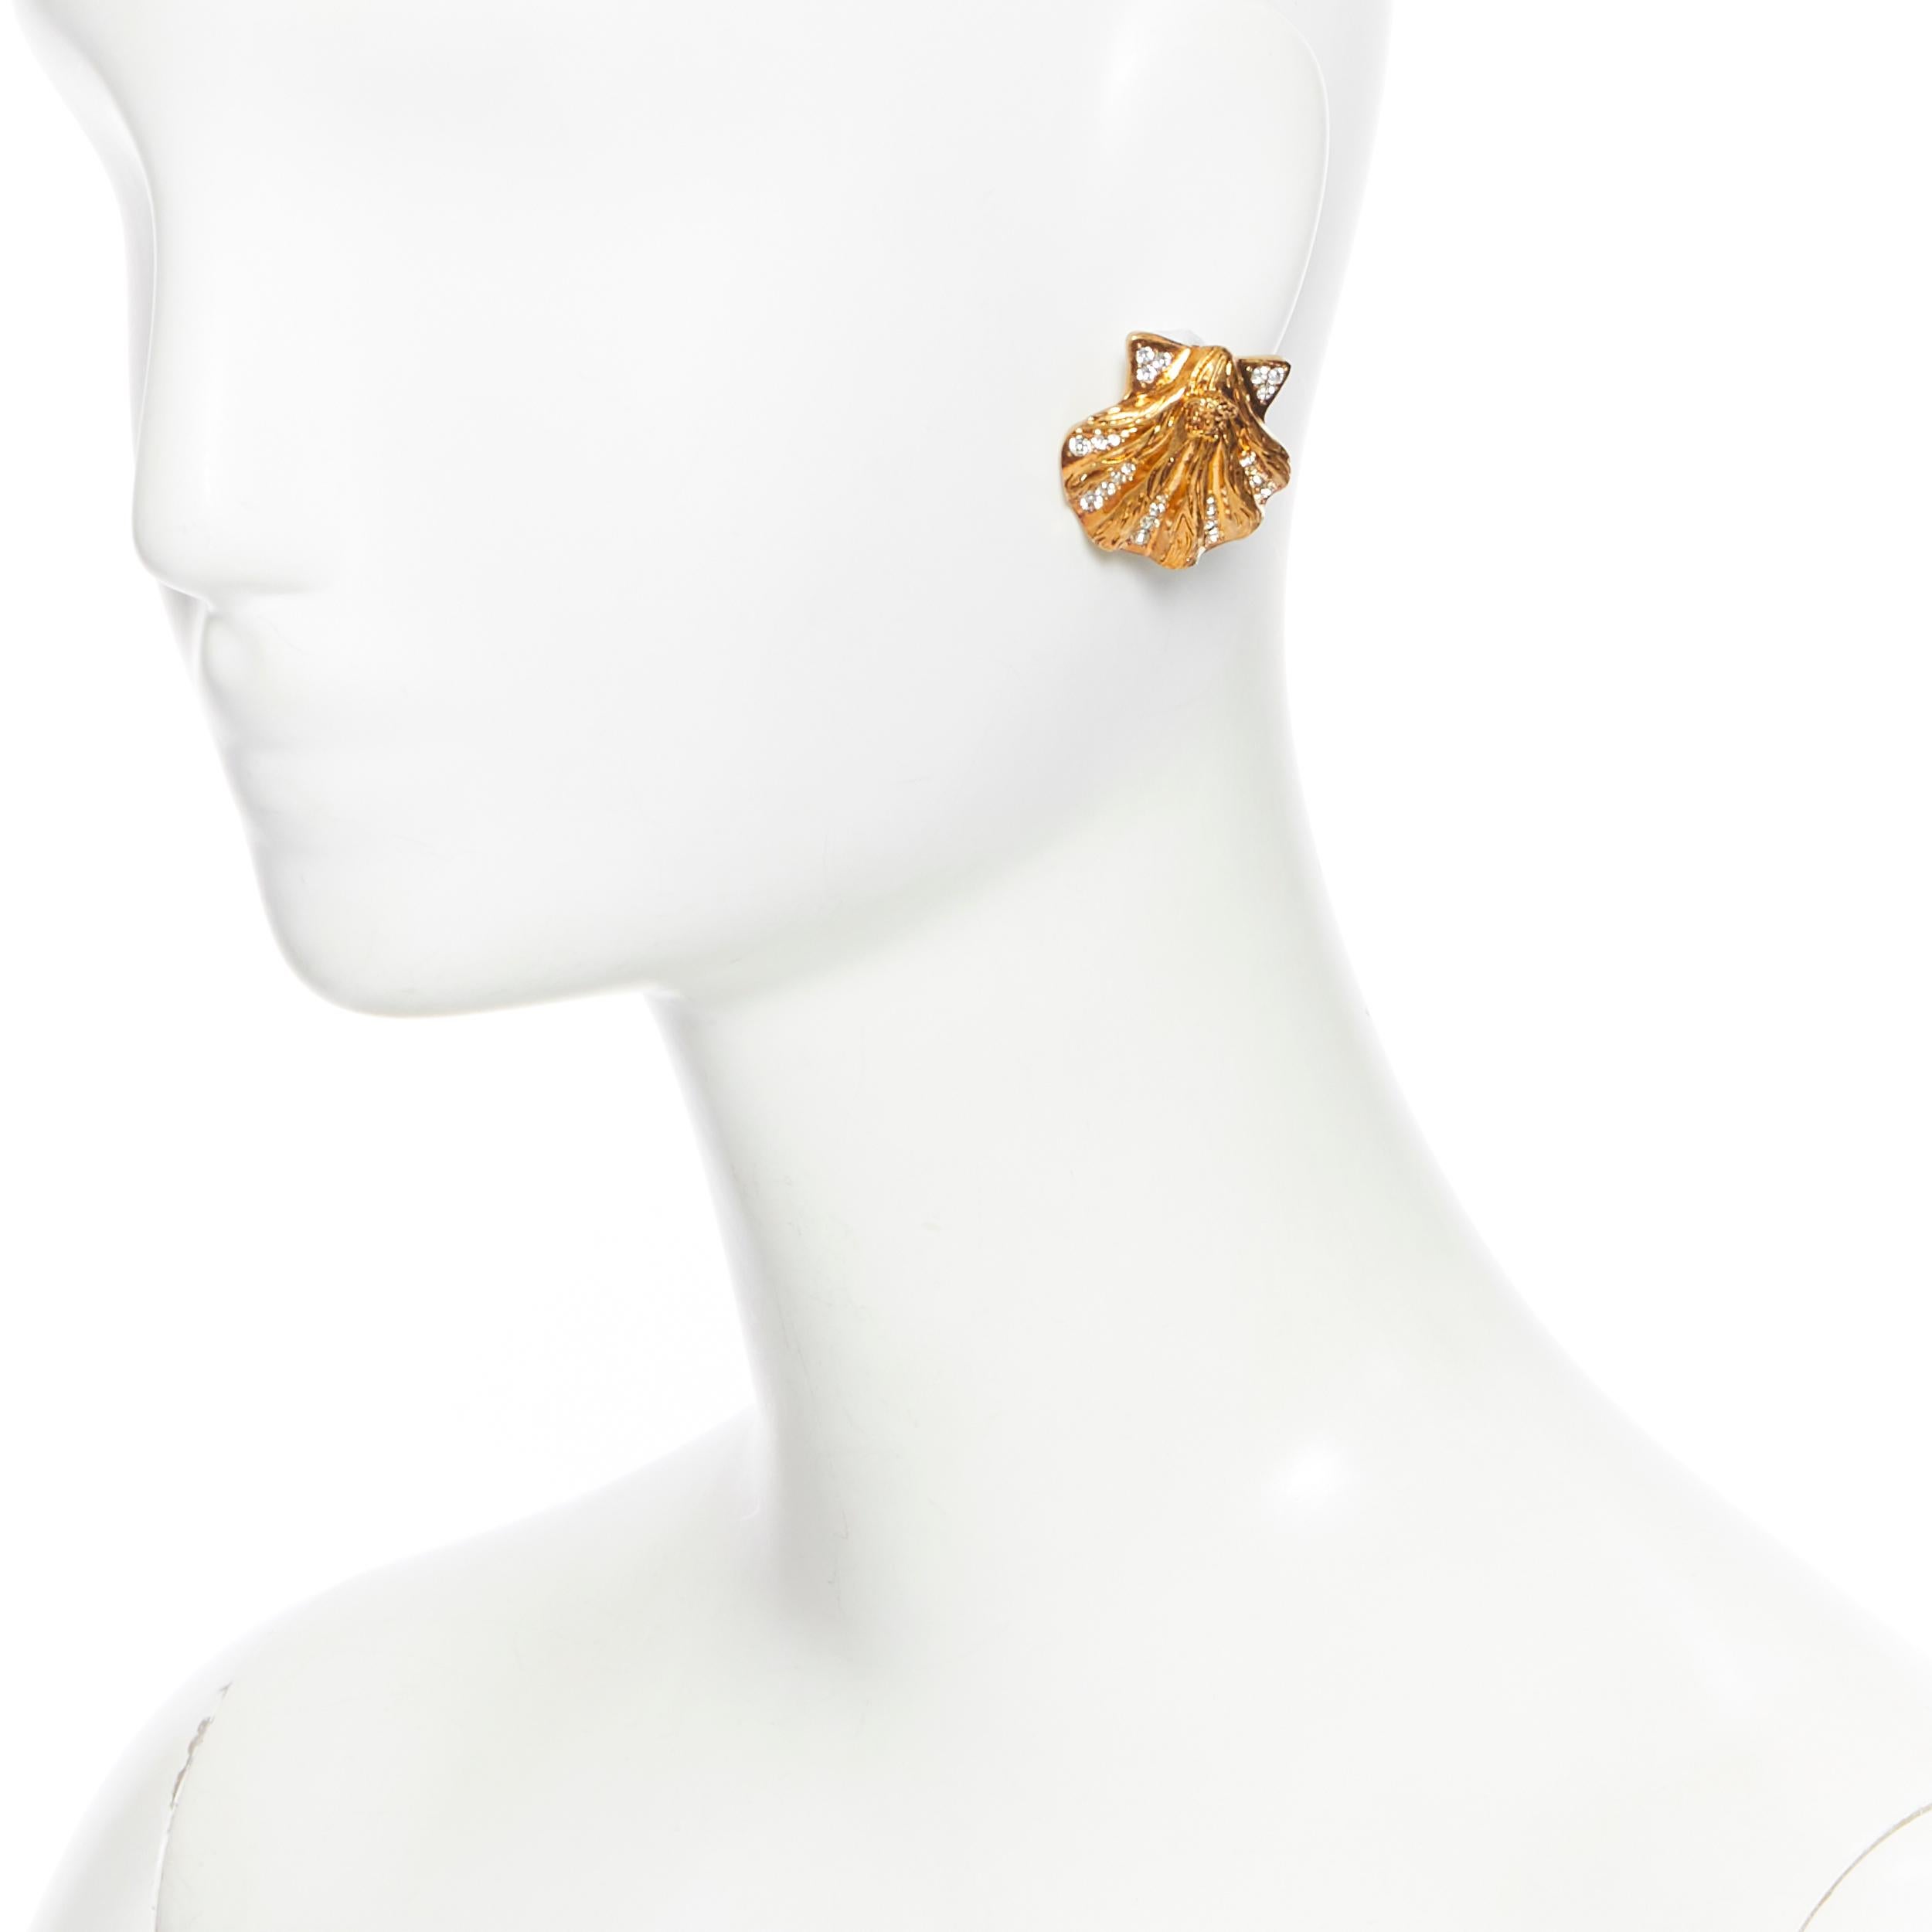 new VERSACE Tribute Tresor De La Mer brushed gold starfish shell crystal earring
Brand: Versace
Designer: Donatella Versace
Collection: Spring Summer 2018
Model Name / Style: Statement earring
Material: Nickel
Color: Gold
Pattern: Solid
Closure: